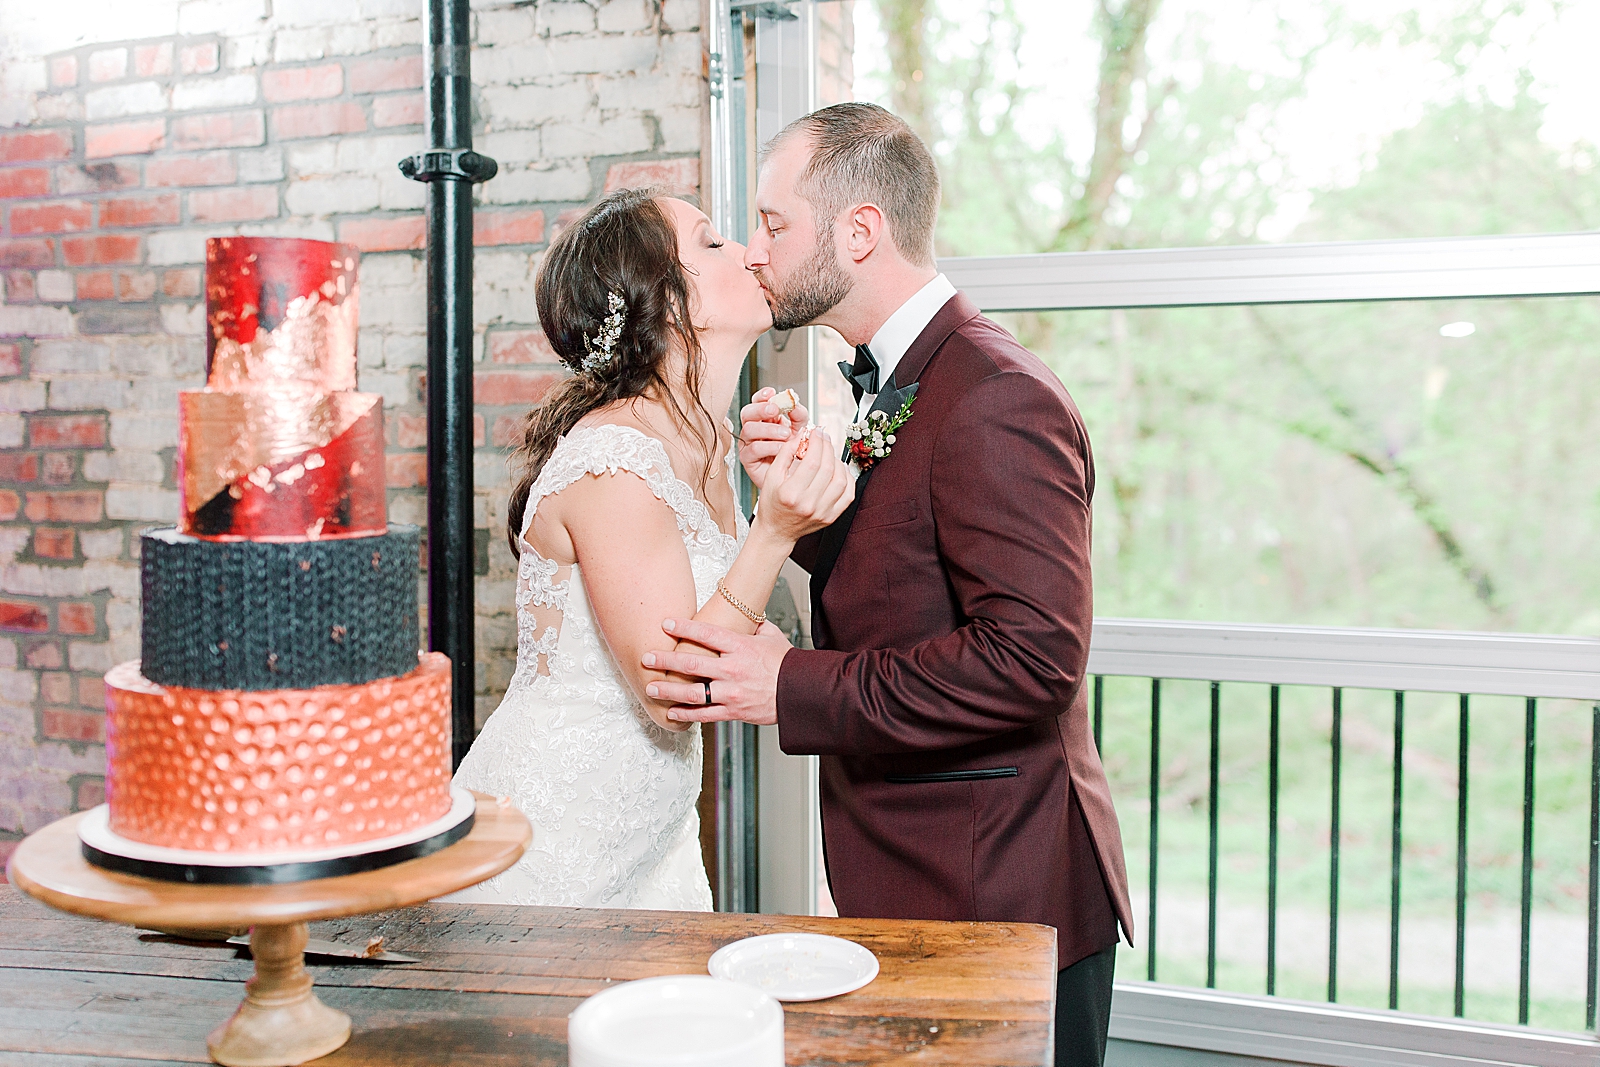 Hackney Warehouse Wedding Reception Bride and Groom Kissing by Cake Photo